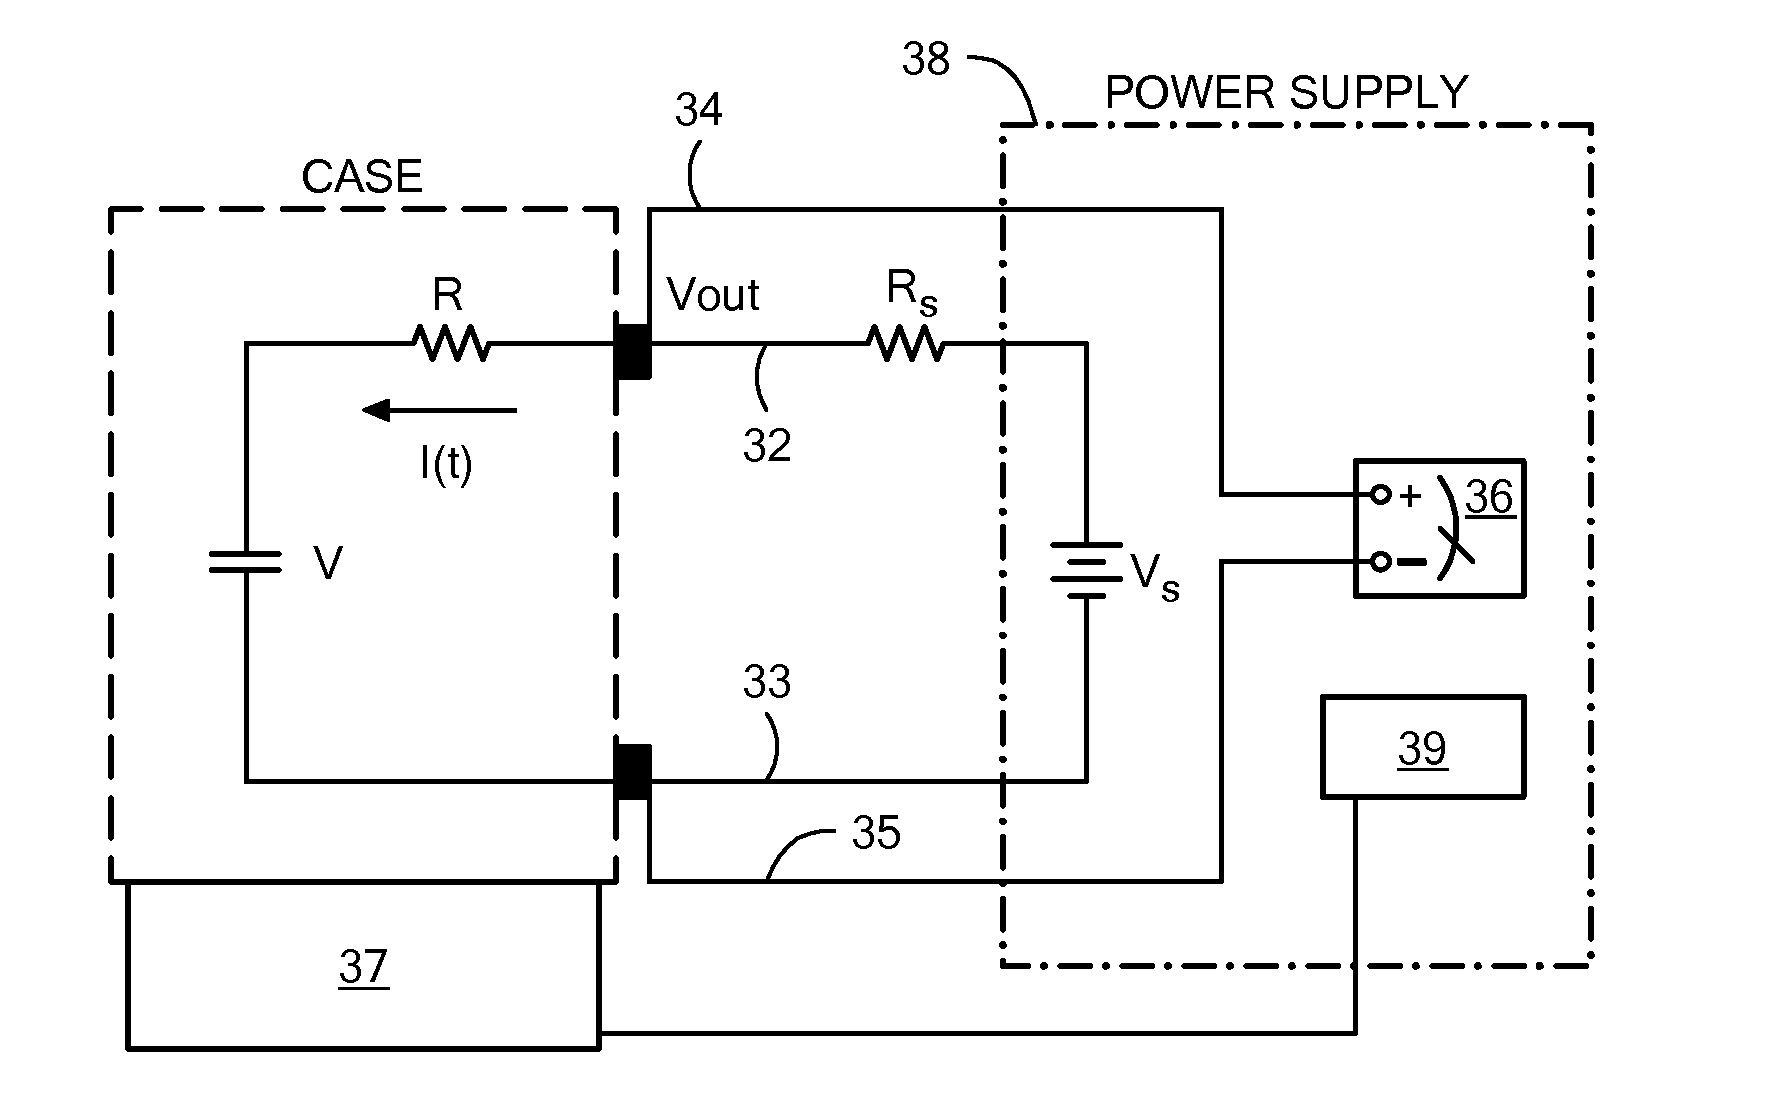 Apparatus and Method for Rapidly Charging Batteries